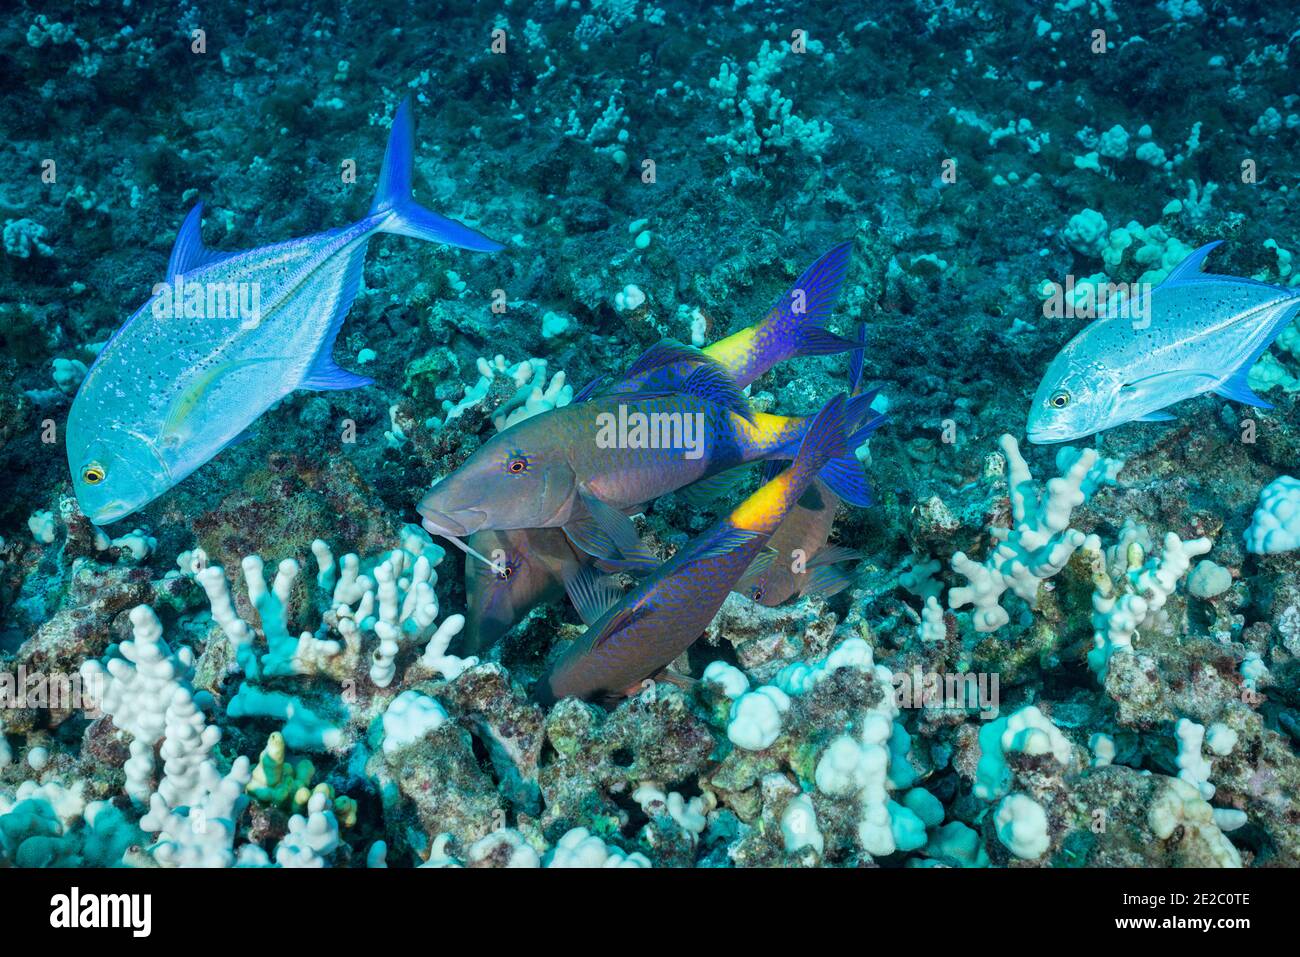 Hunting coalition of blue goatfish and bluefin trevally; Jacks follow the goatfish to seize any prey that the goatfish flush out of the coral, Hawaii Stock Photo